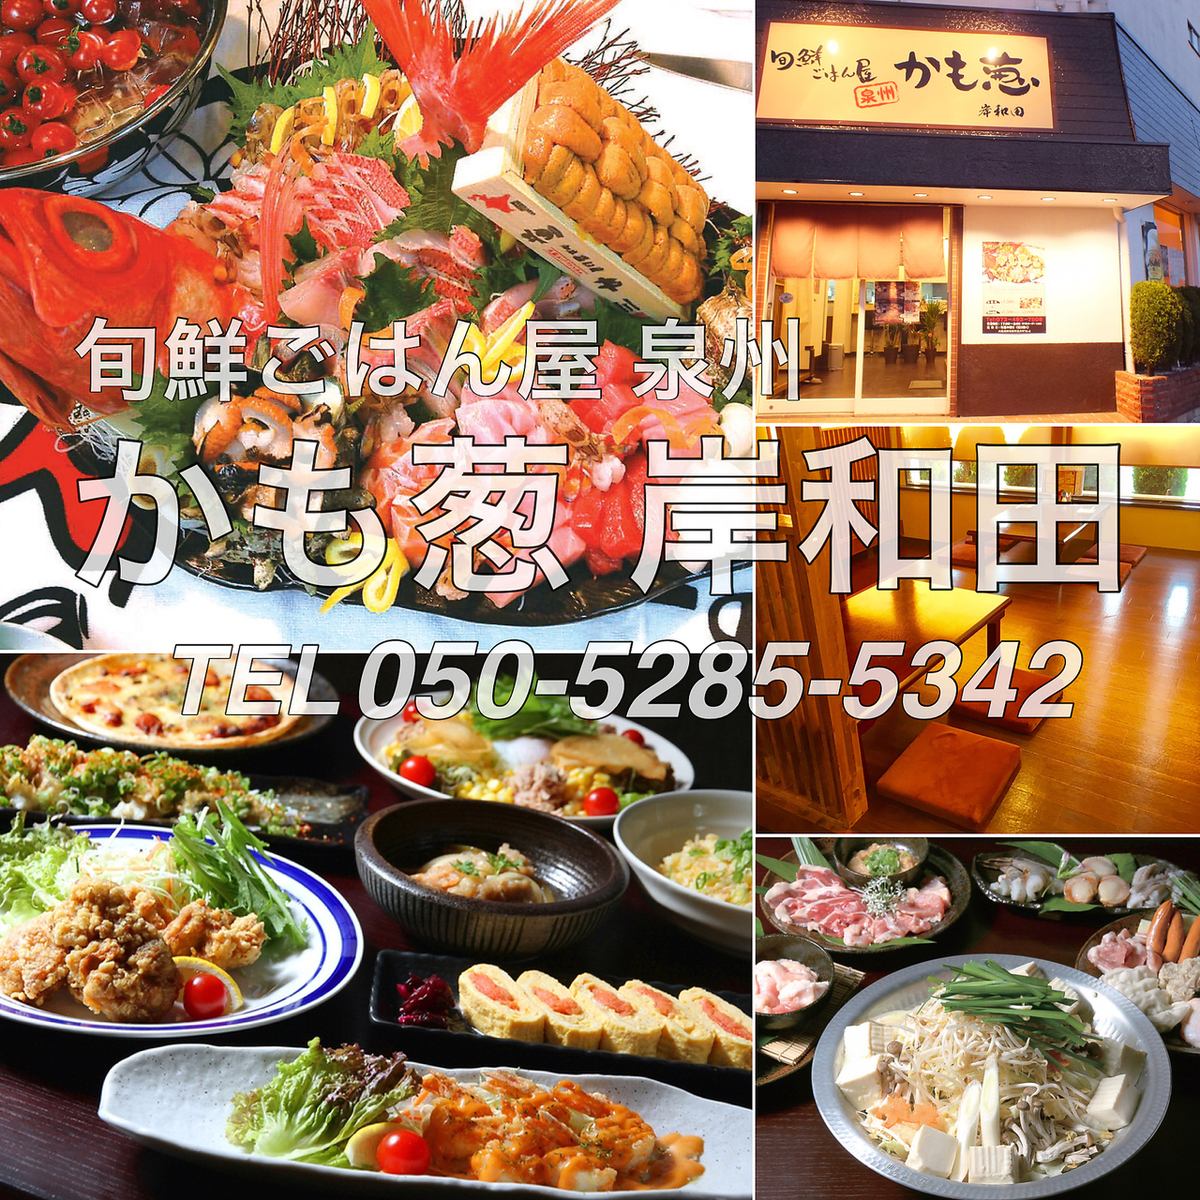 Kamo-negi is popular♪ Banquet course with all-you-can-drink for 90 minutes from 3,630 JPY (incl. tax)